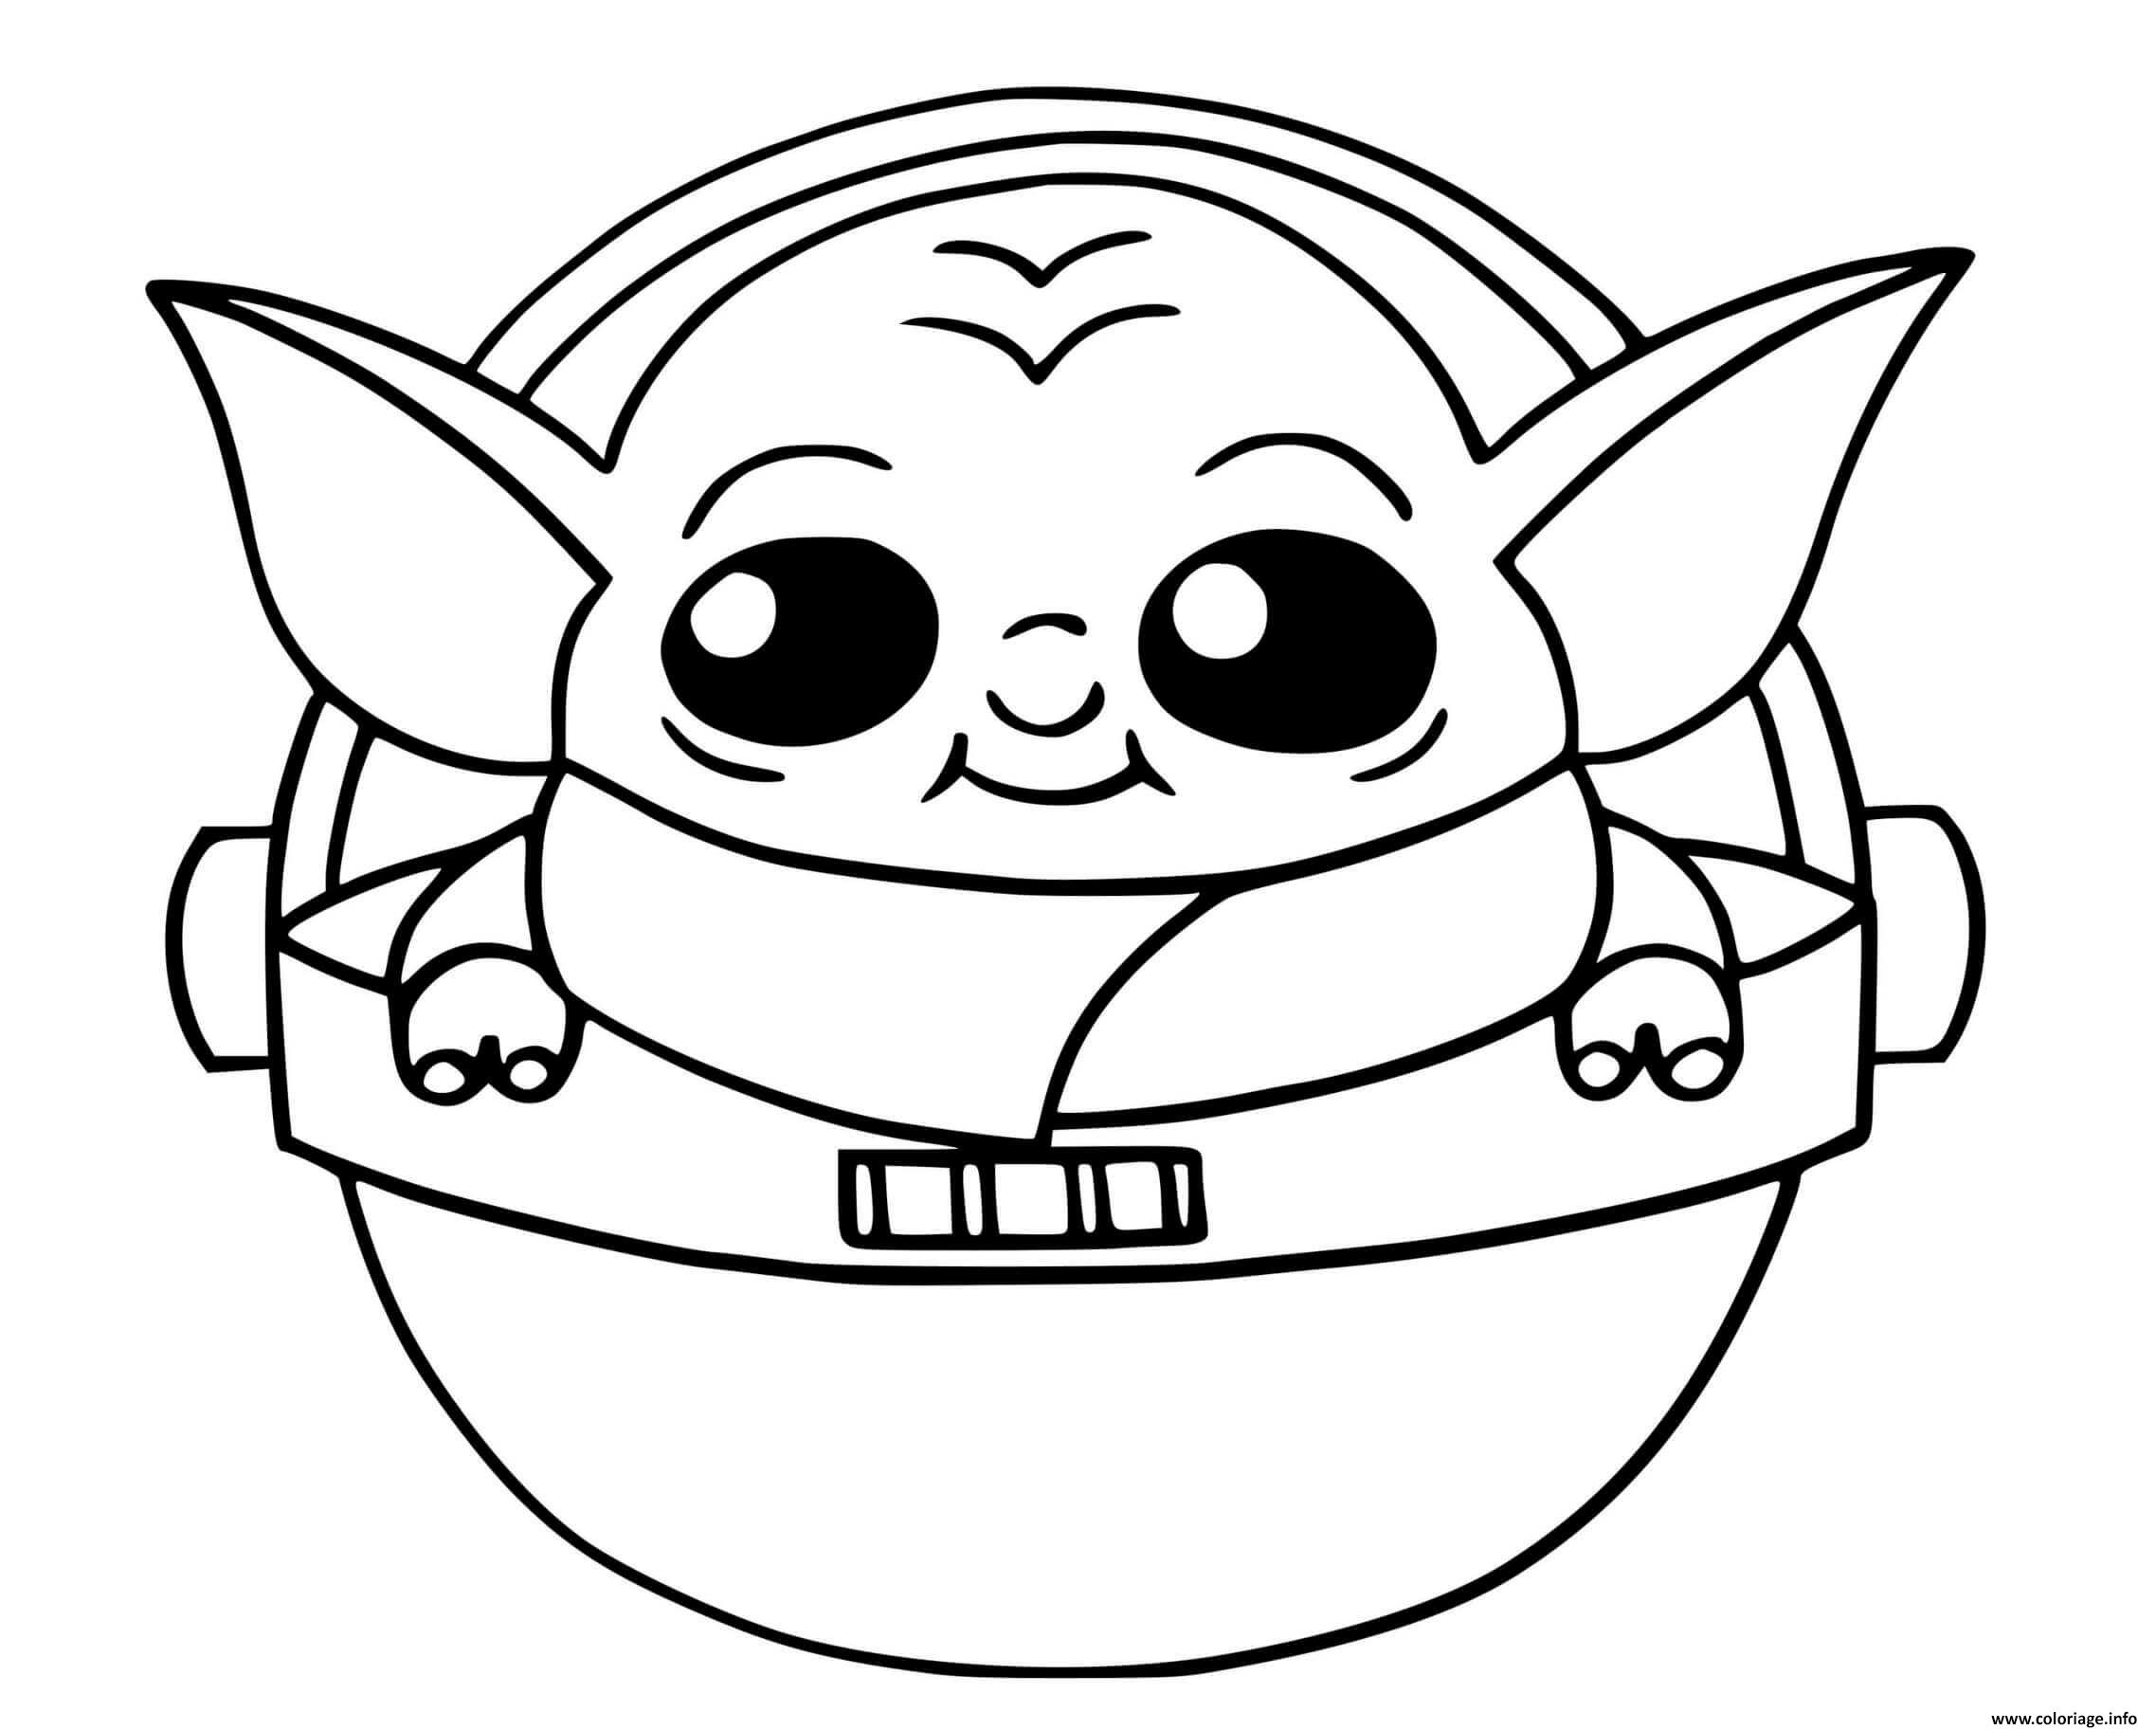 Coloriage Baby Yoda From The Mandalorian Fortnite Season 5 Jecolorie Com